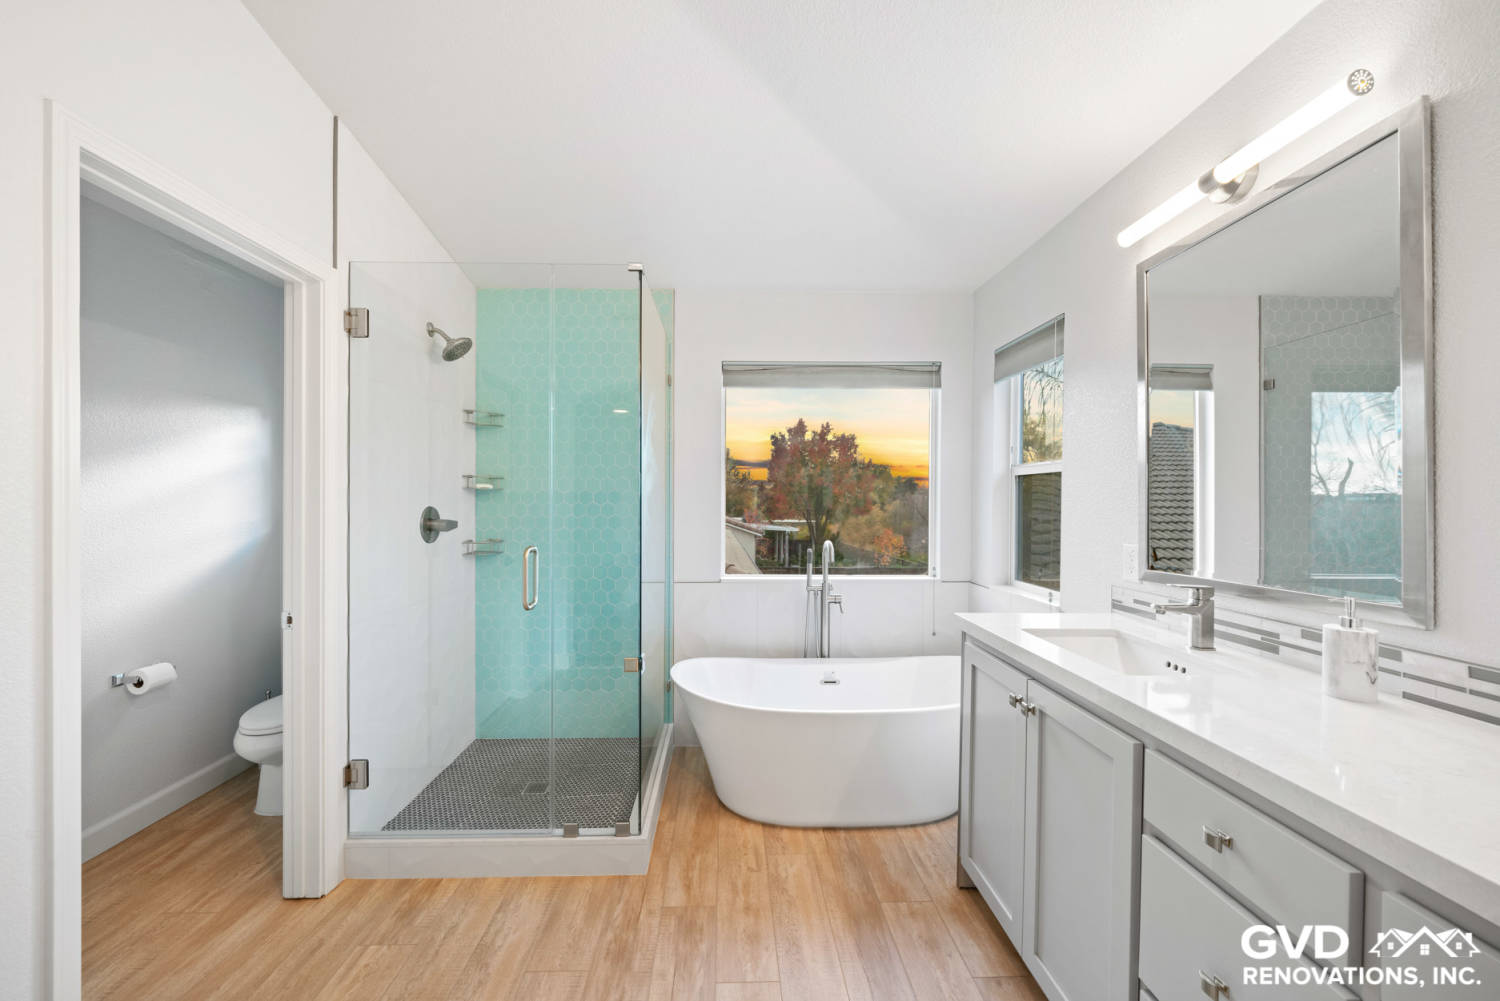 How Much Is the Average Cost of a Bathroom Remodel?